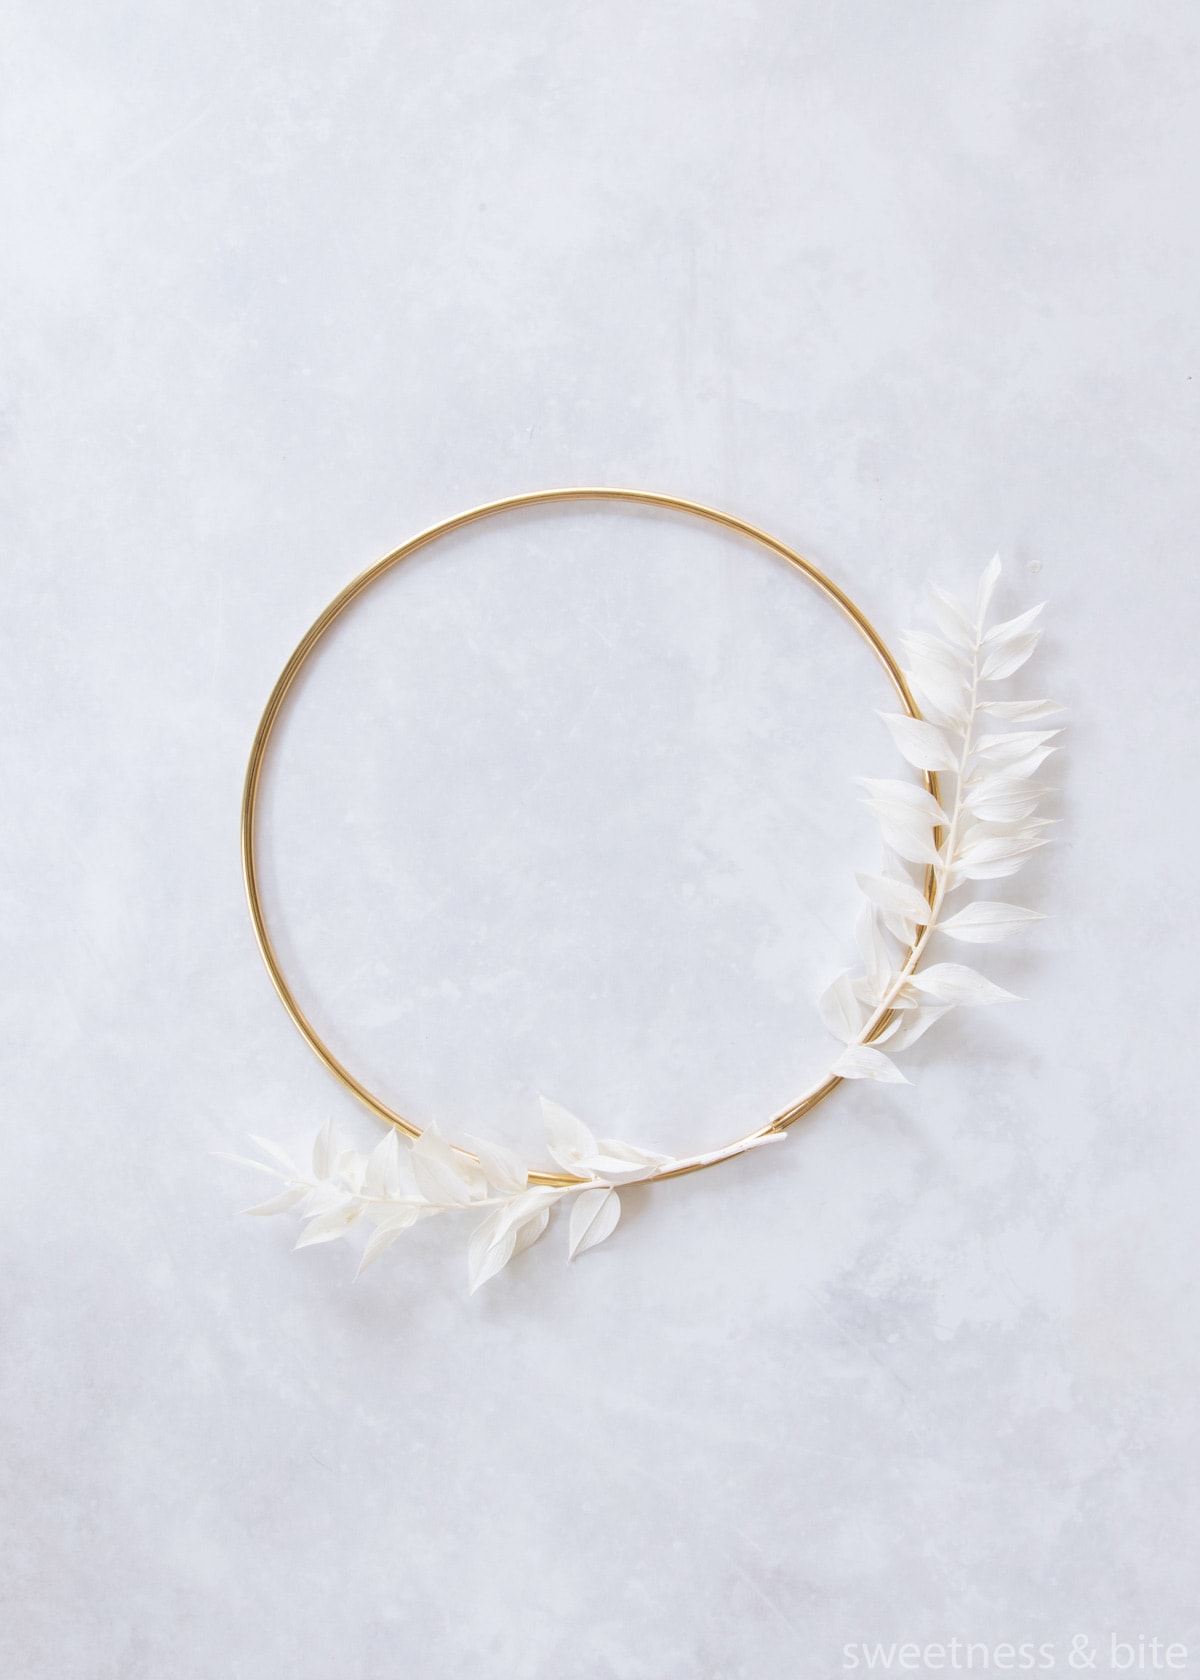 Two pieces of white ruscus tied to the hoop with clear thread.